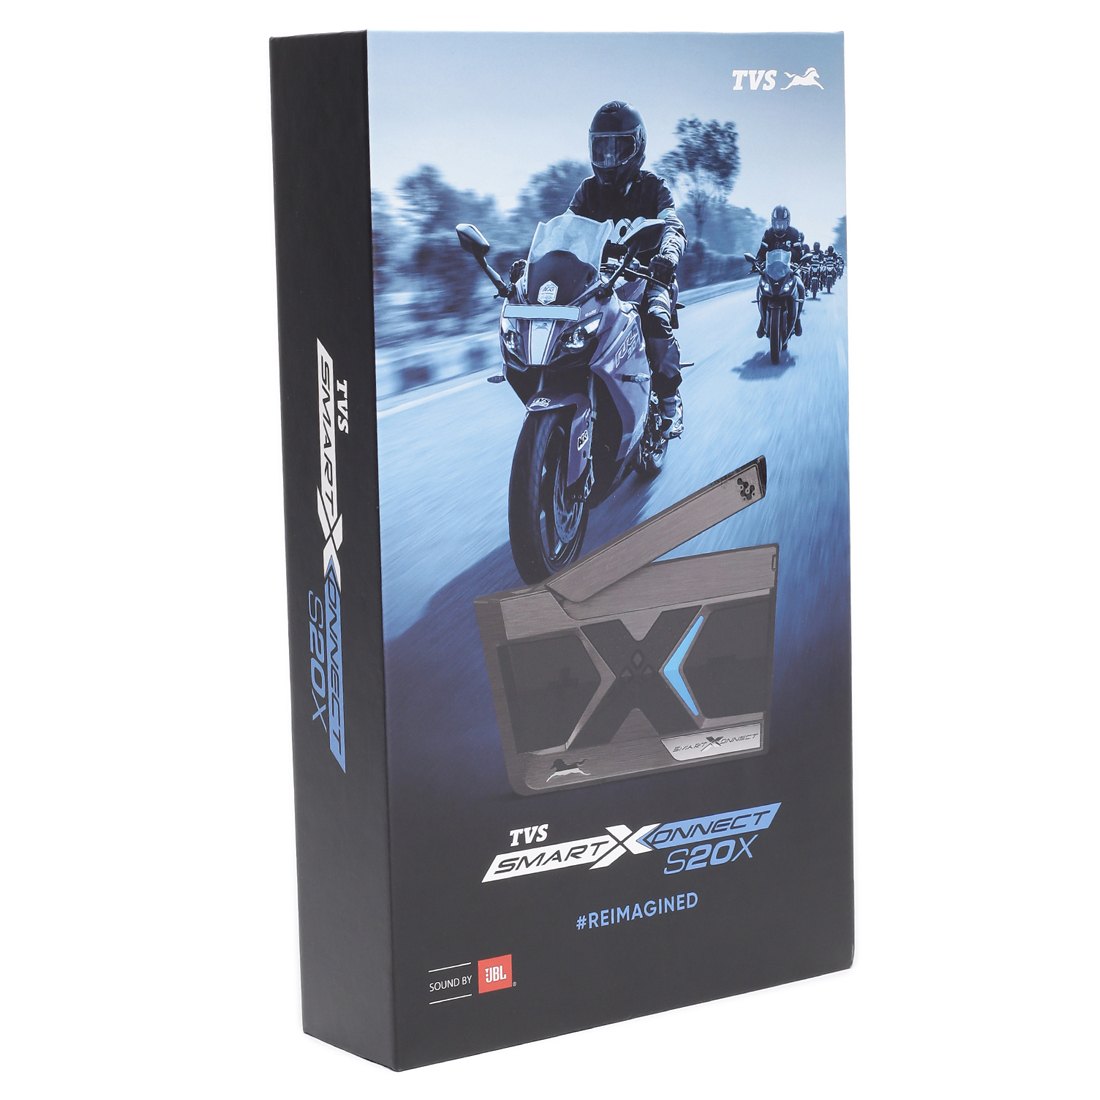  TVS Racing SmartXonnect S10X : Premium Helmet Bluetooth Device with JBL HD Sound & Ride Lynk connecting 1 fellow biker- Waterproof with 16 Hours Battery